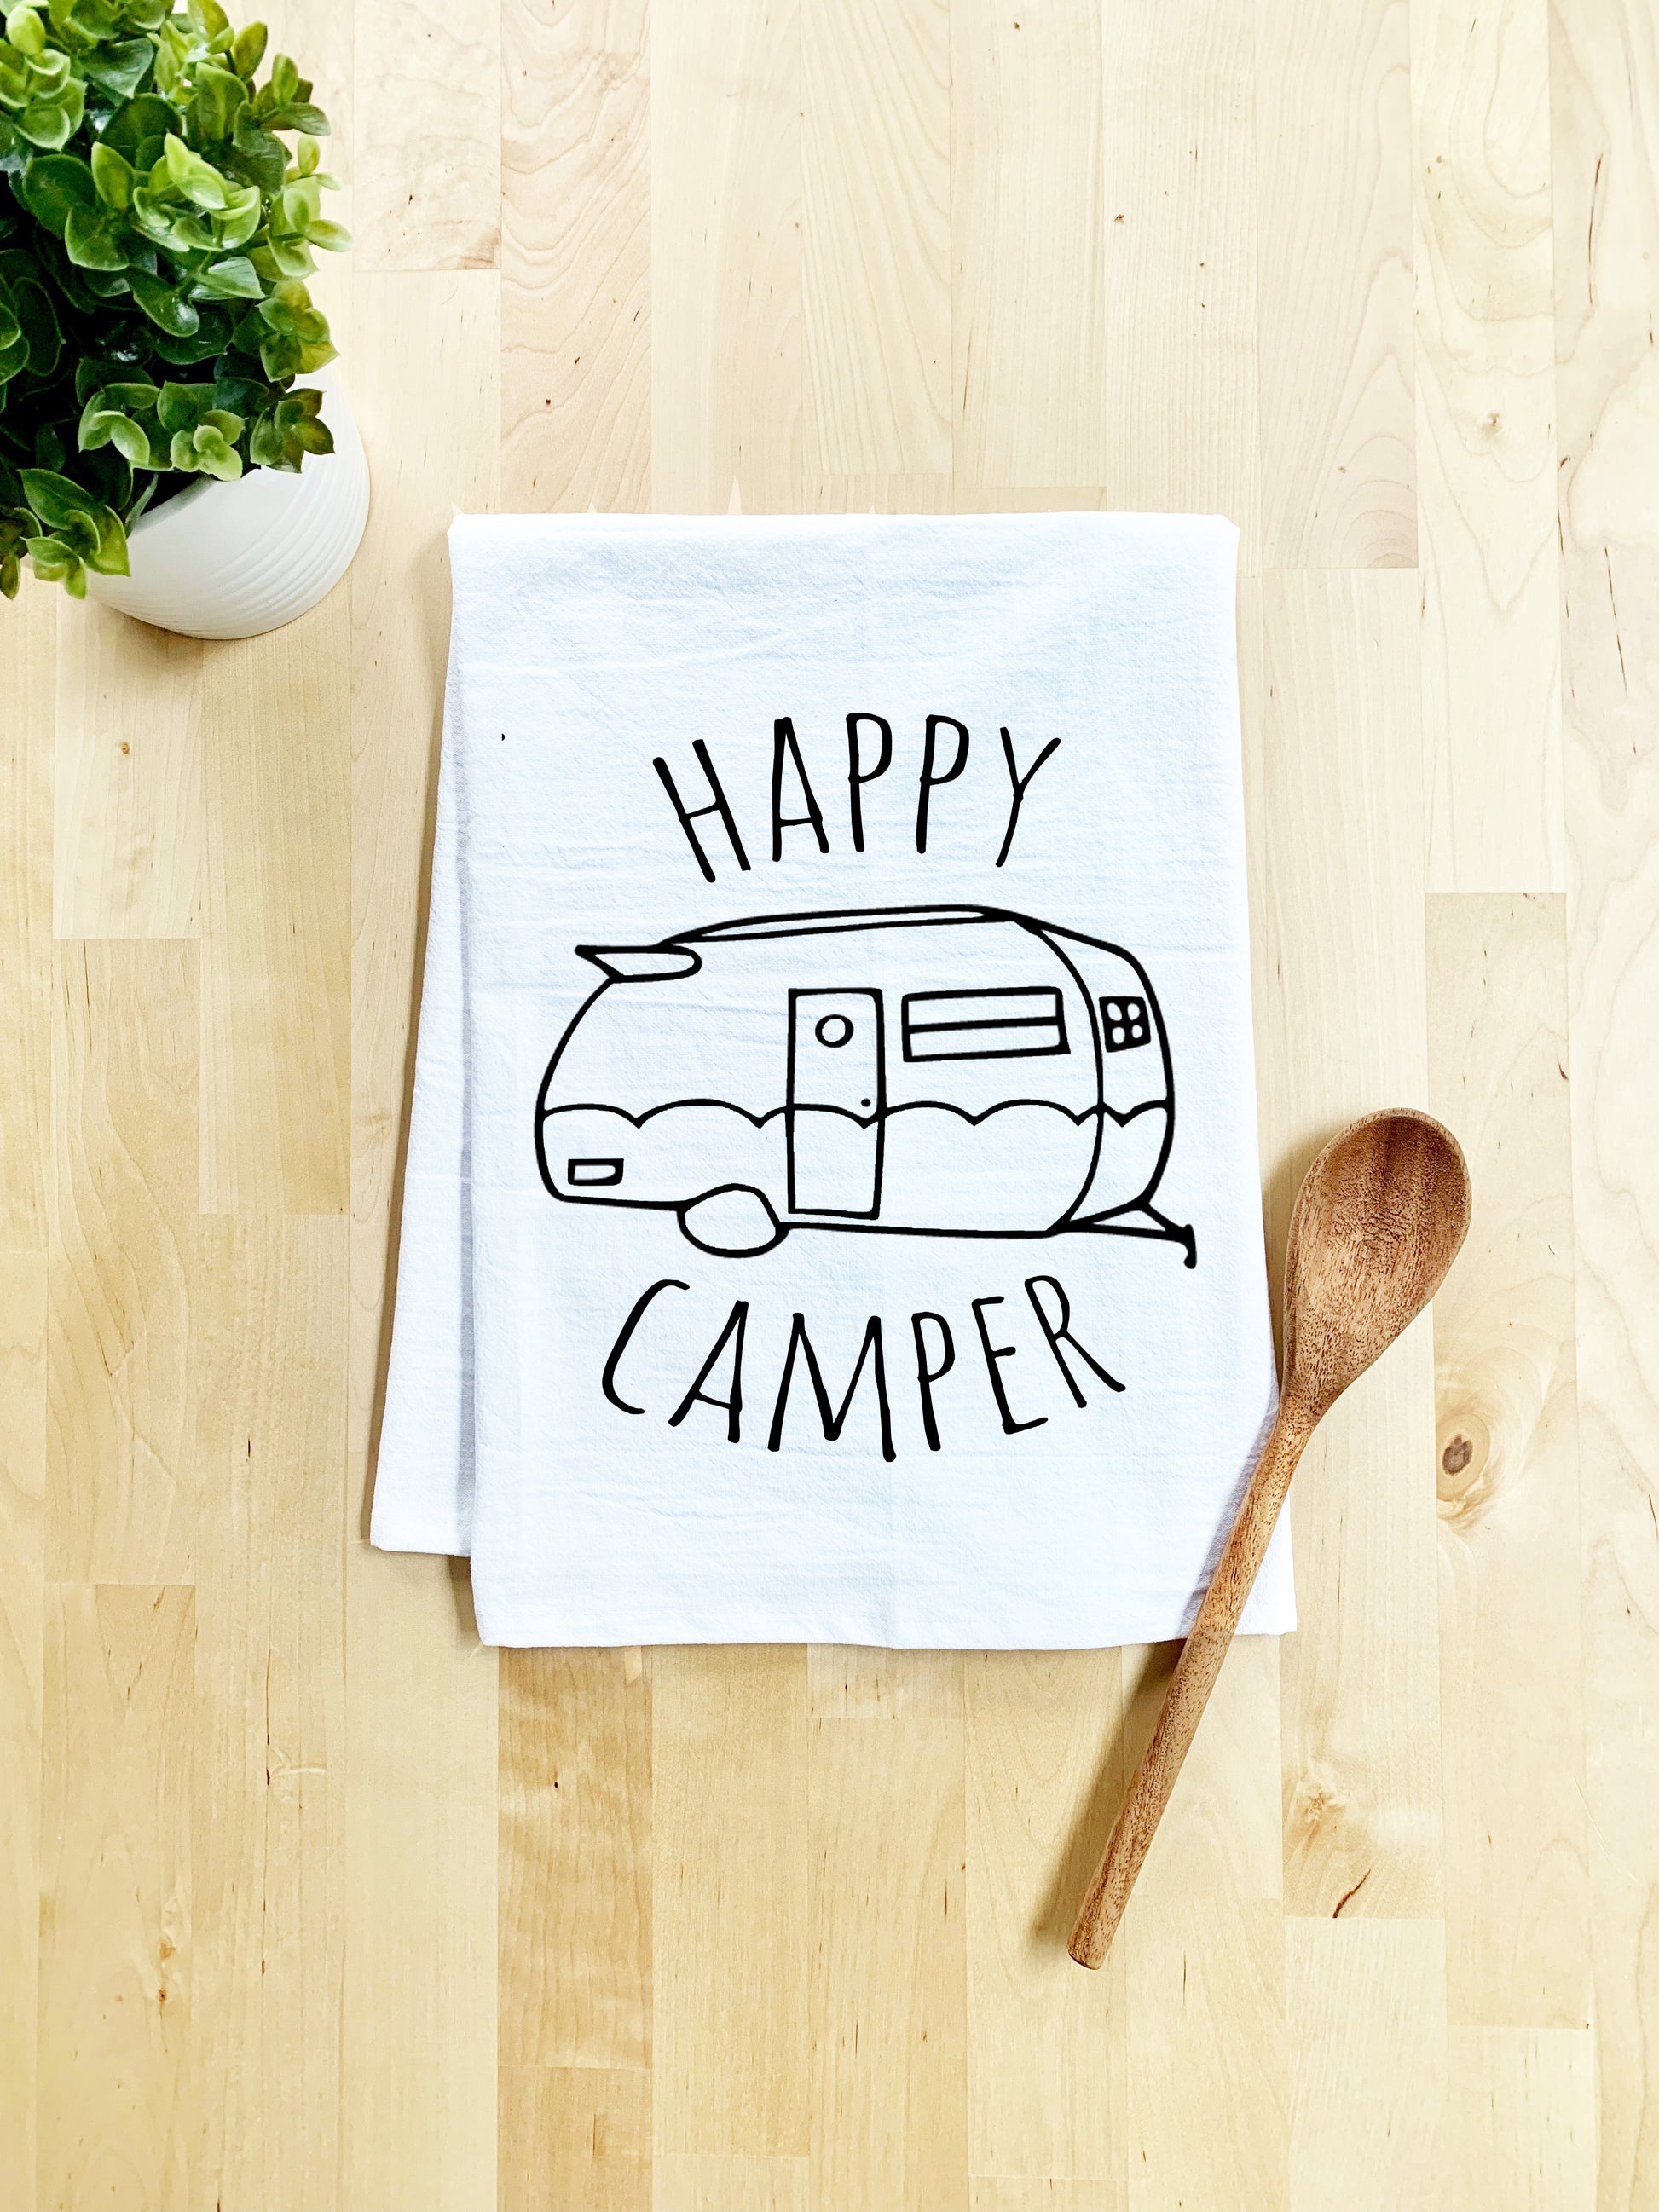 Kingdder 6 Pcs Camper Dish Towels Camping Kitchen Towels Funny Sayings  Happy Camper Towels 16 x 24 Inches Kitchen Hand Towels Housewarming  Farmhouse